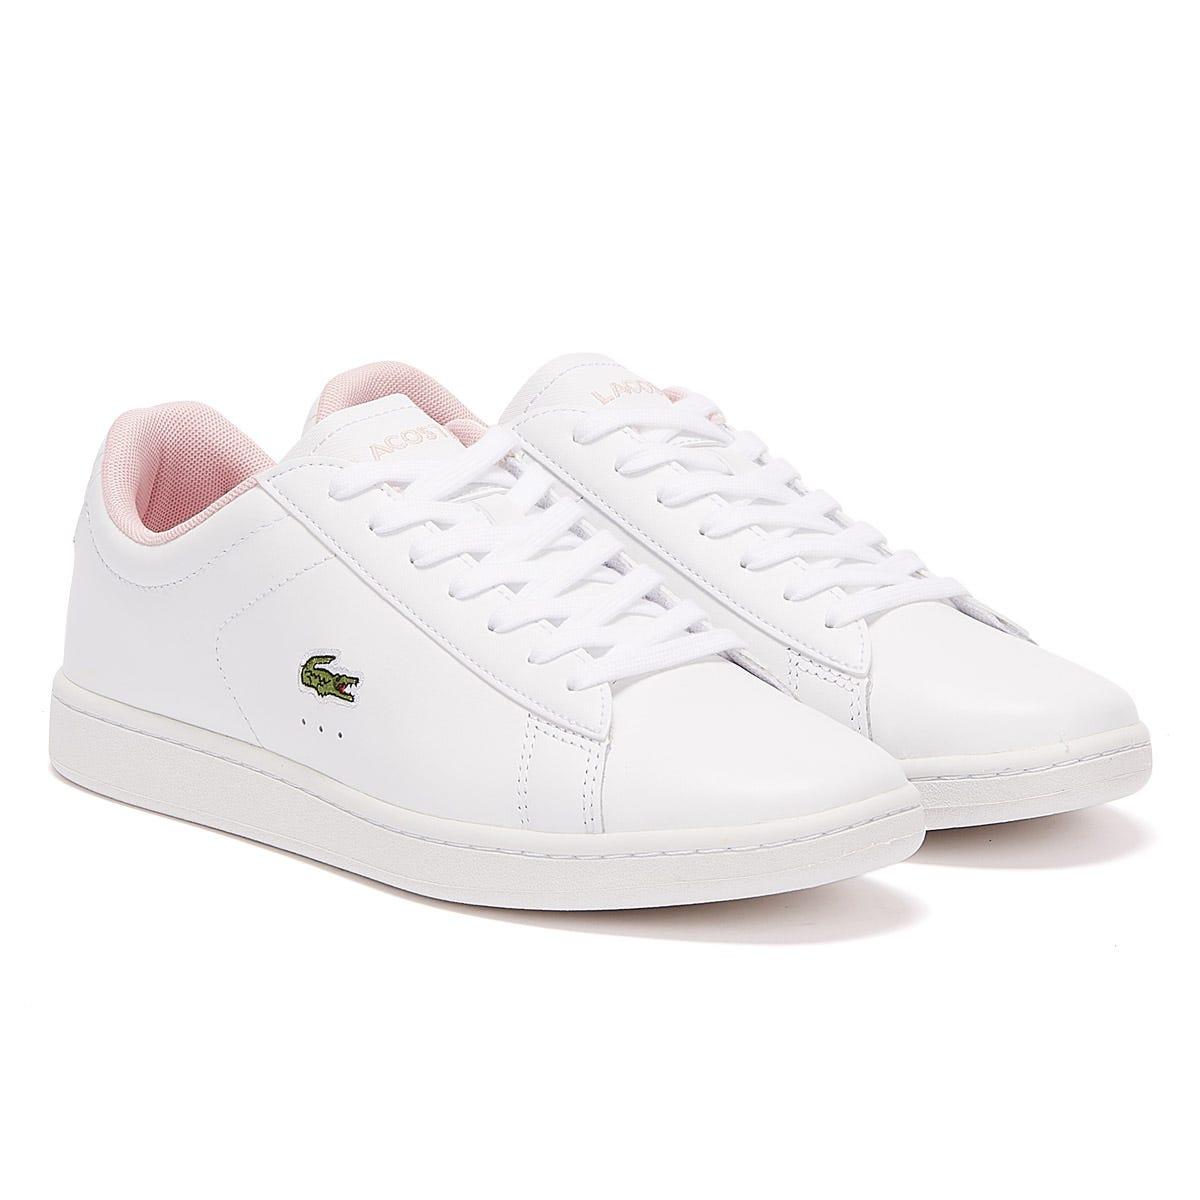 Lacoste Leather Carnaby Evo 120 5 / Light Pink Trainers in White - Lyst